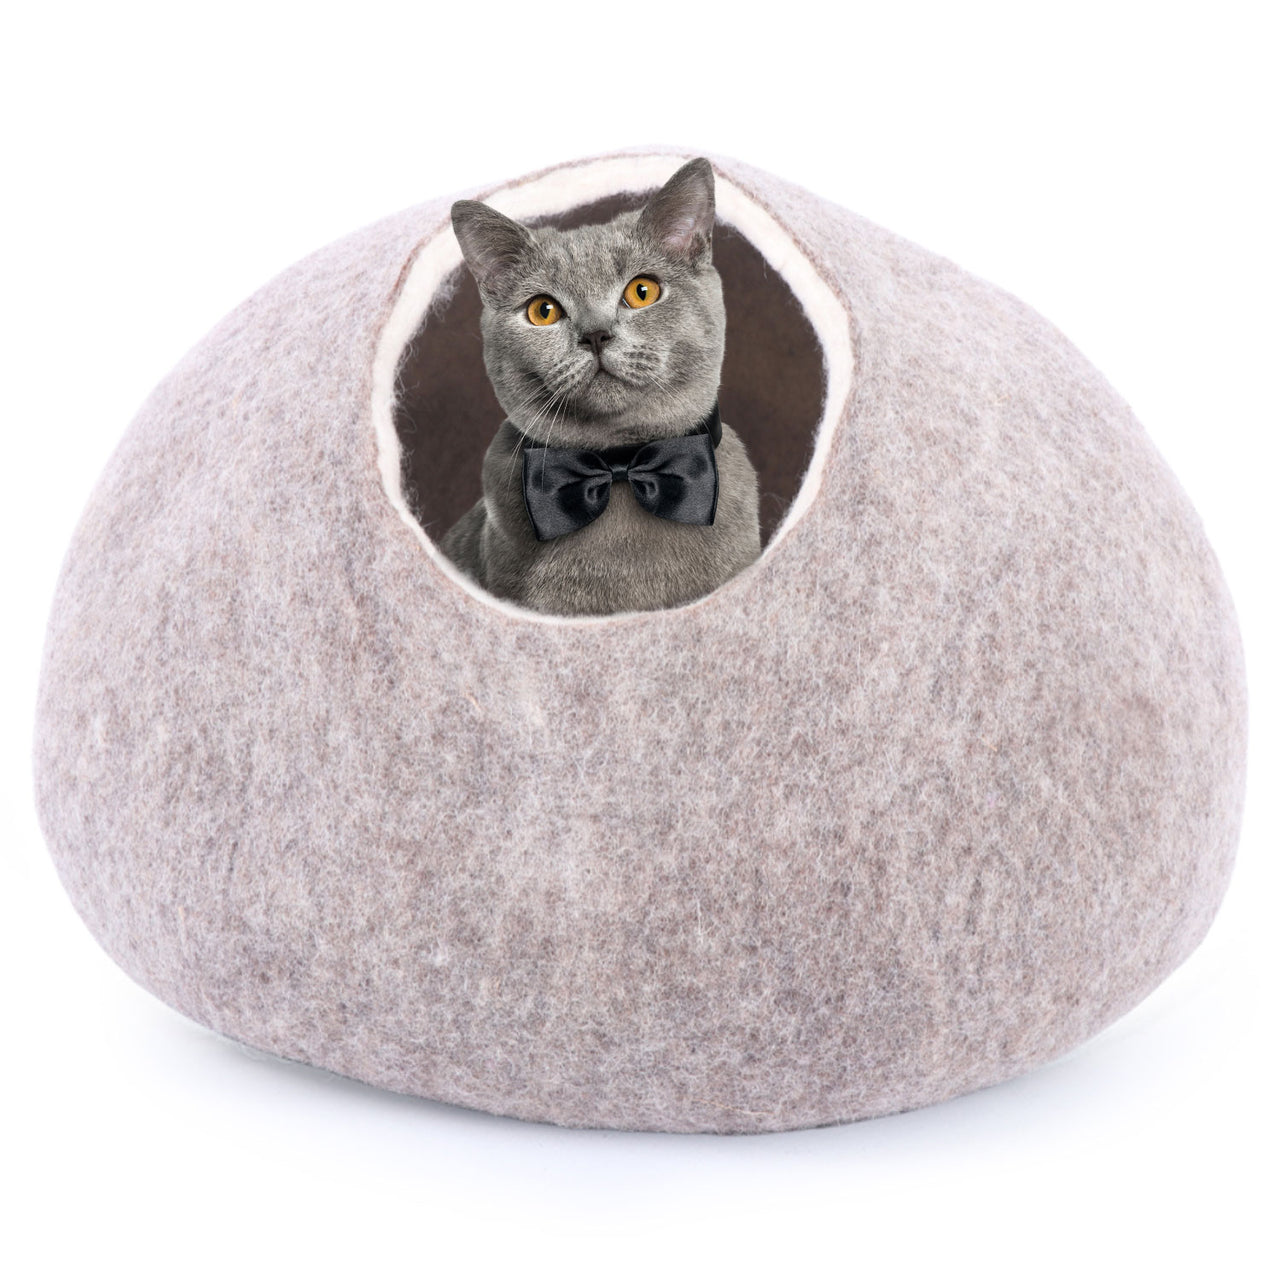 Felt and wool Premium Cat Bed Cave  - Eco Friendly 100% Merino Wool Beds for Cats and Kittens